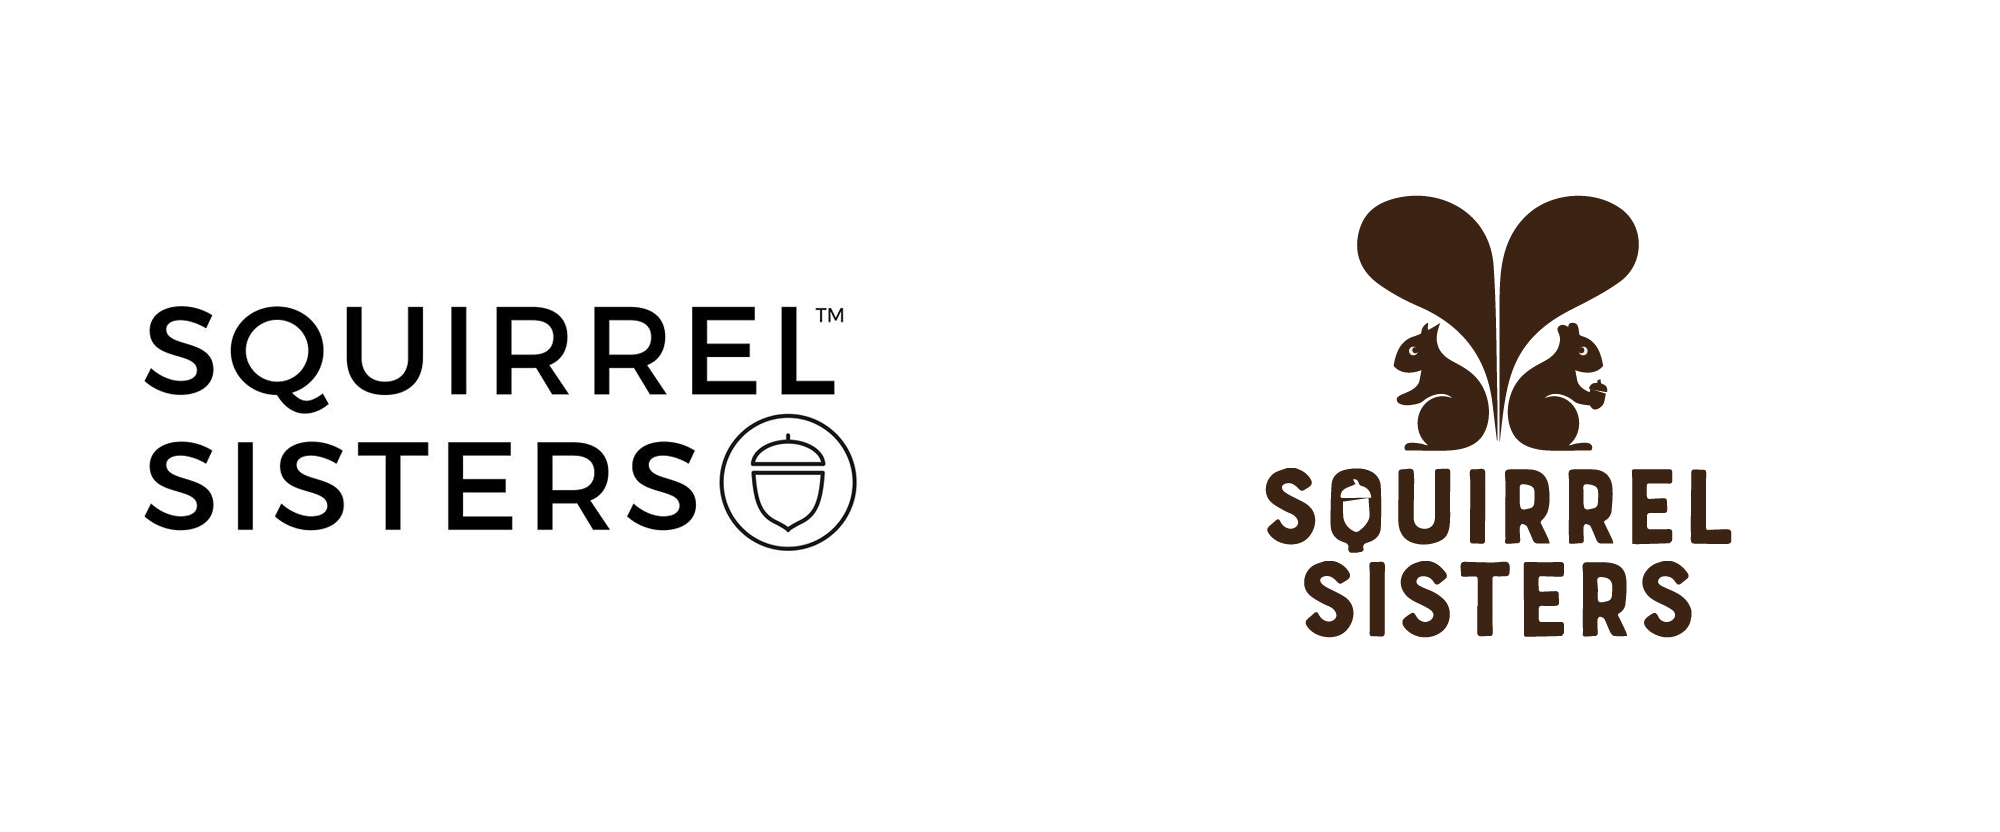 New Logo and Packaging for Squirrel Sisters by Design Bridge